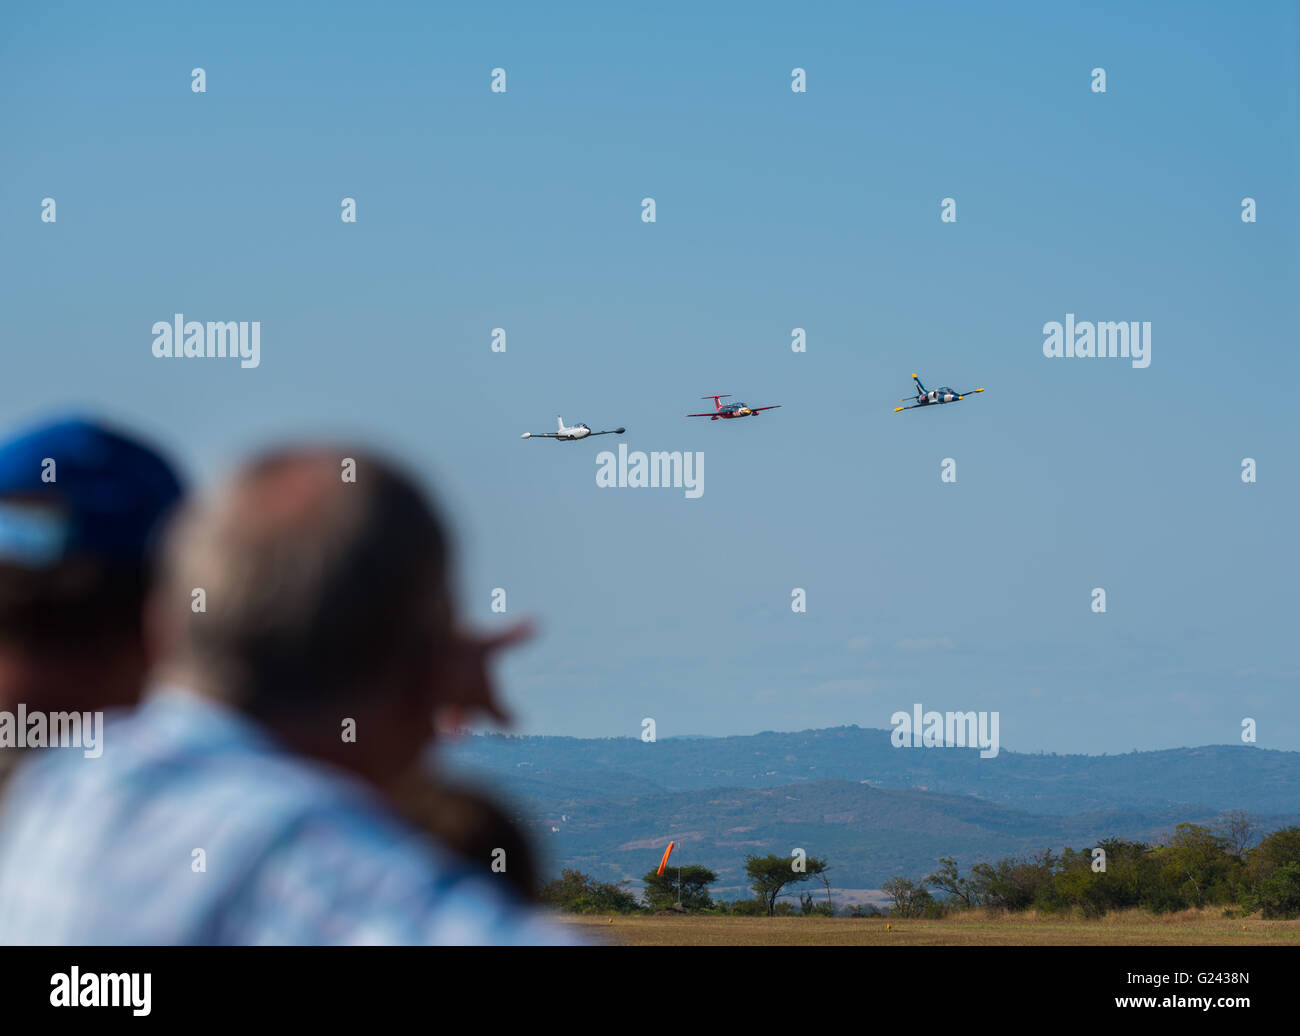 A spectator pointing at the approaching jets at the Lowveld Airshow Stock Photo